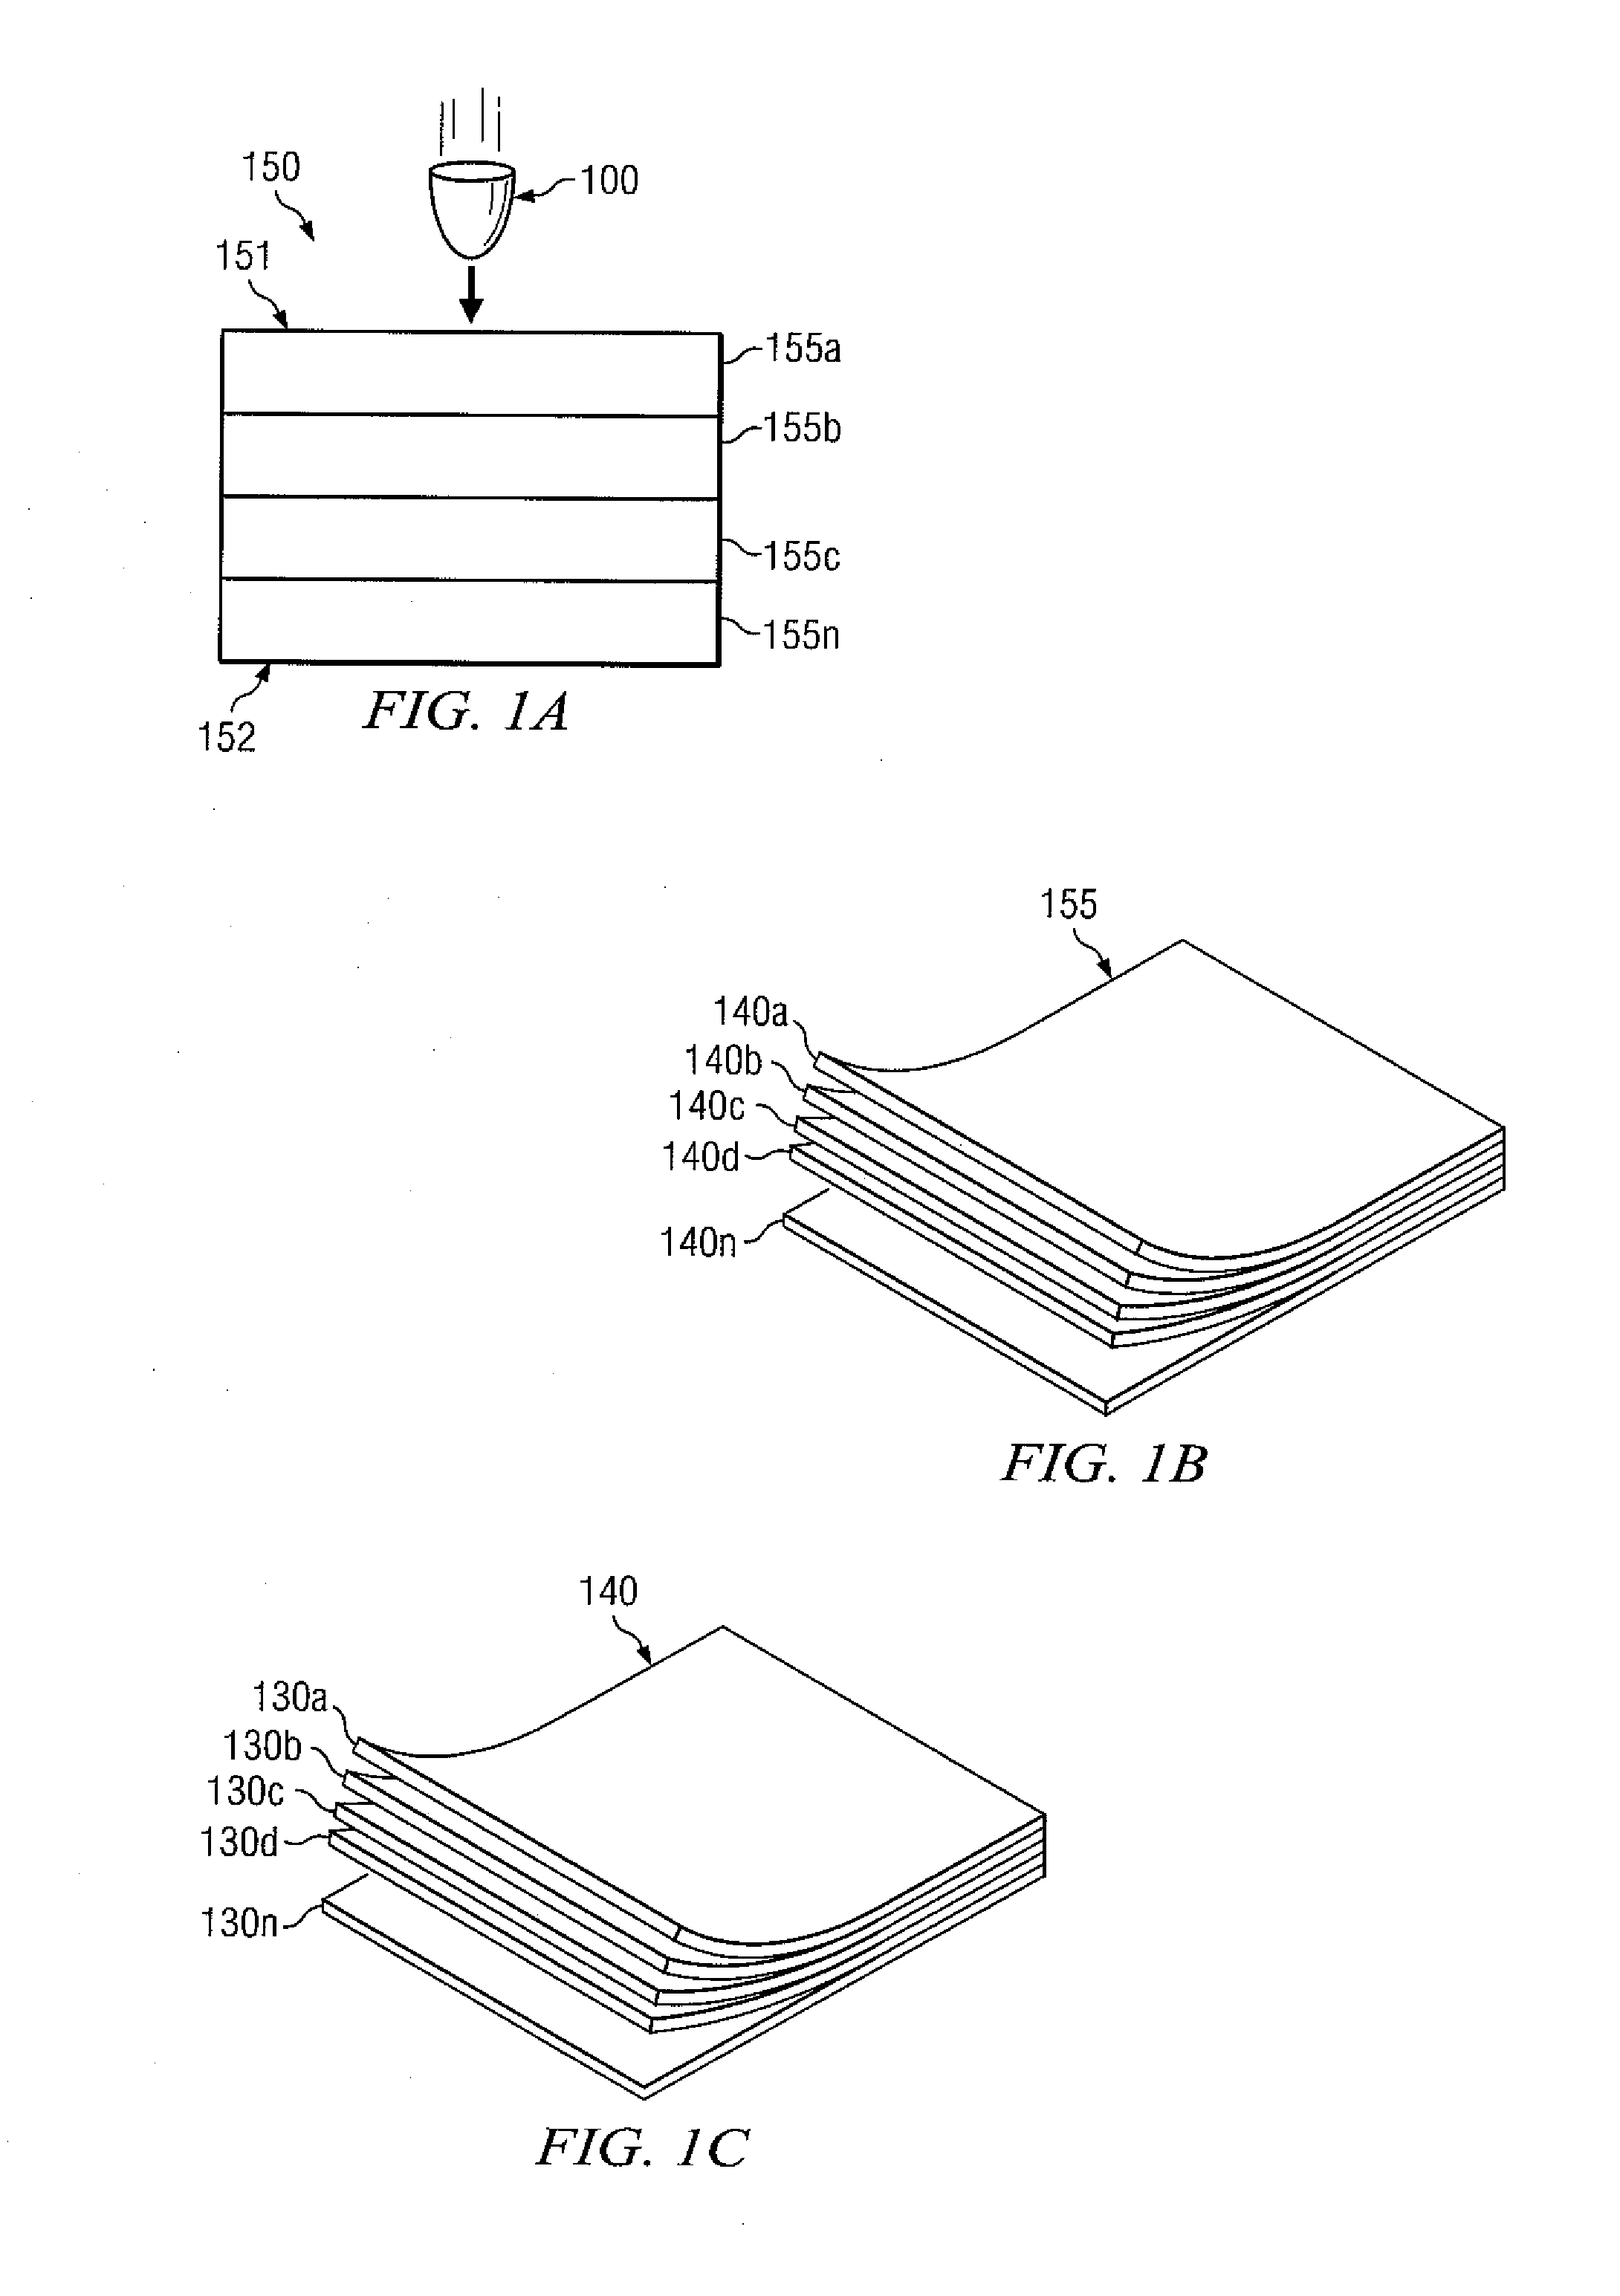 Method of Layering Composite Sheets to Improve Armor Capabilities